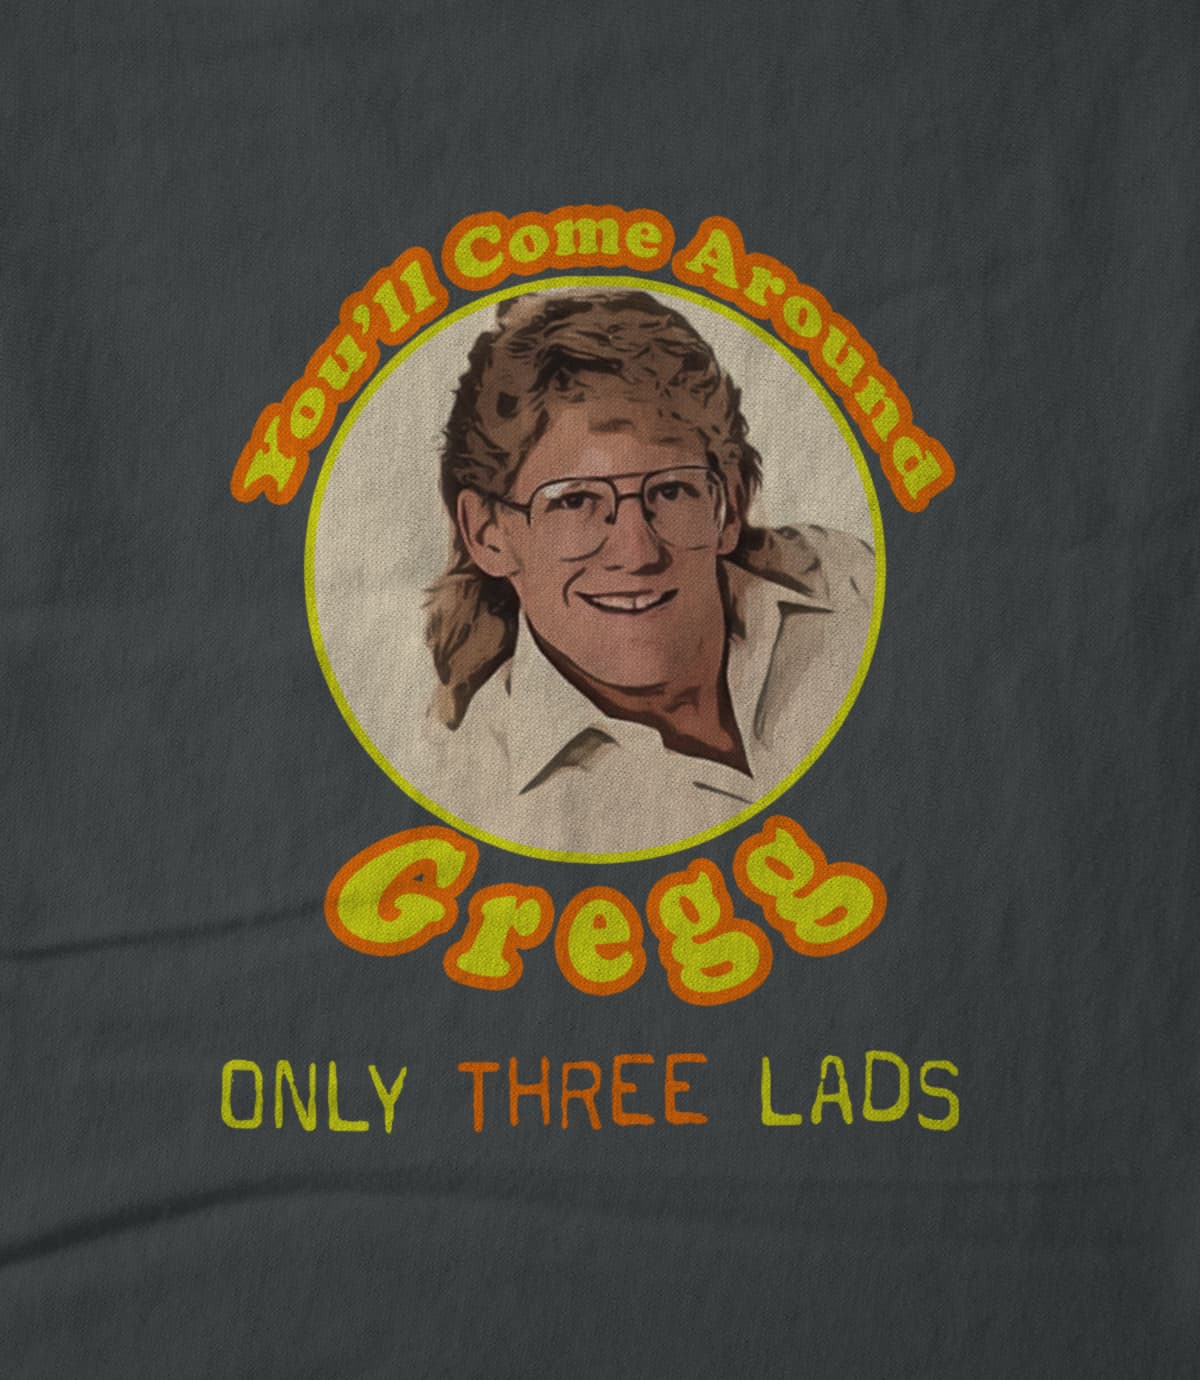 Only three lads you ll come around gregg 1605736382